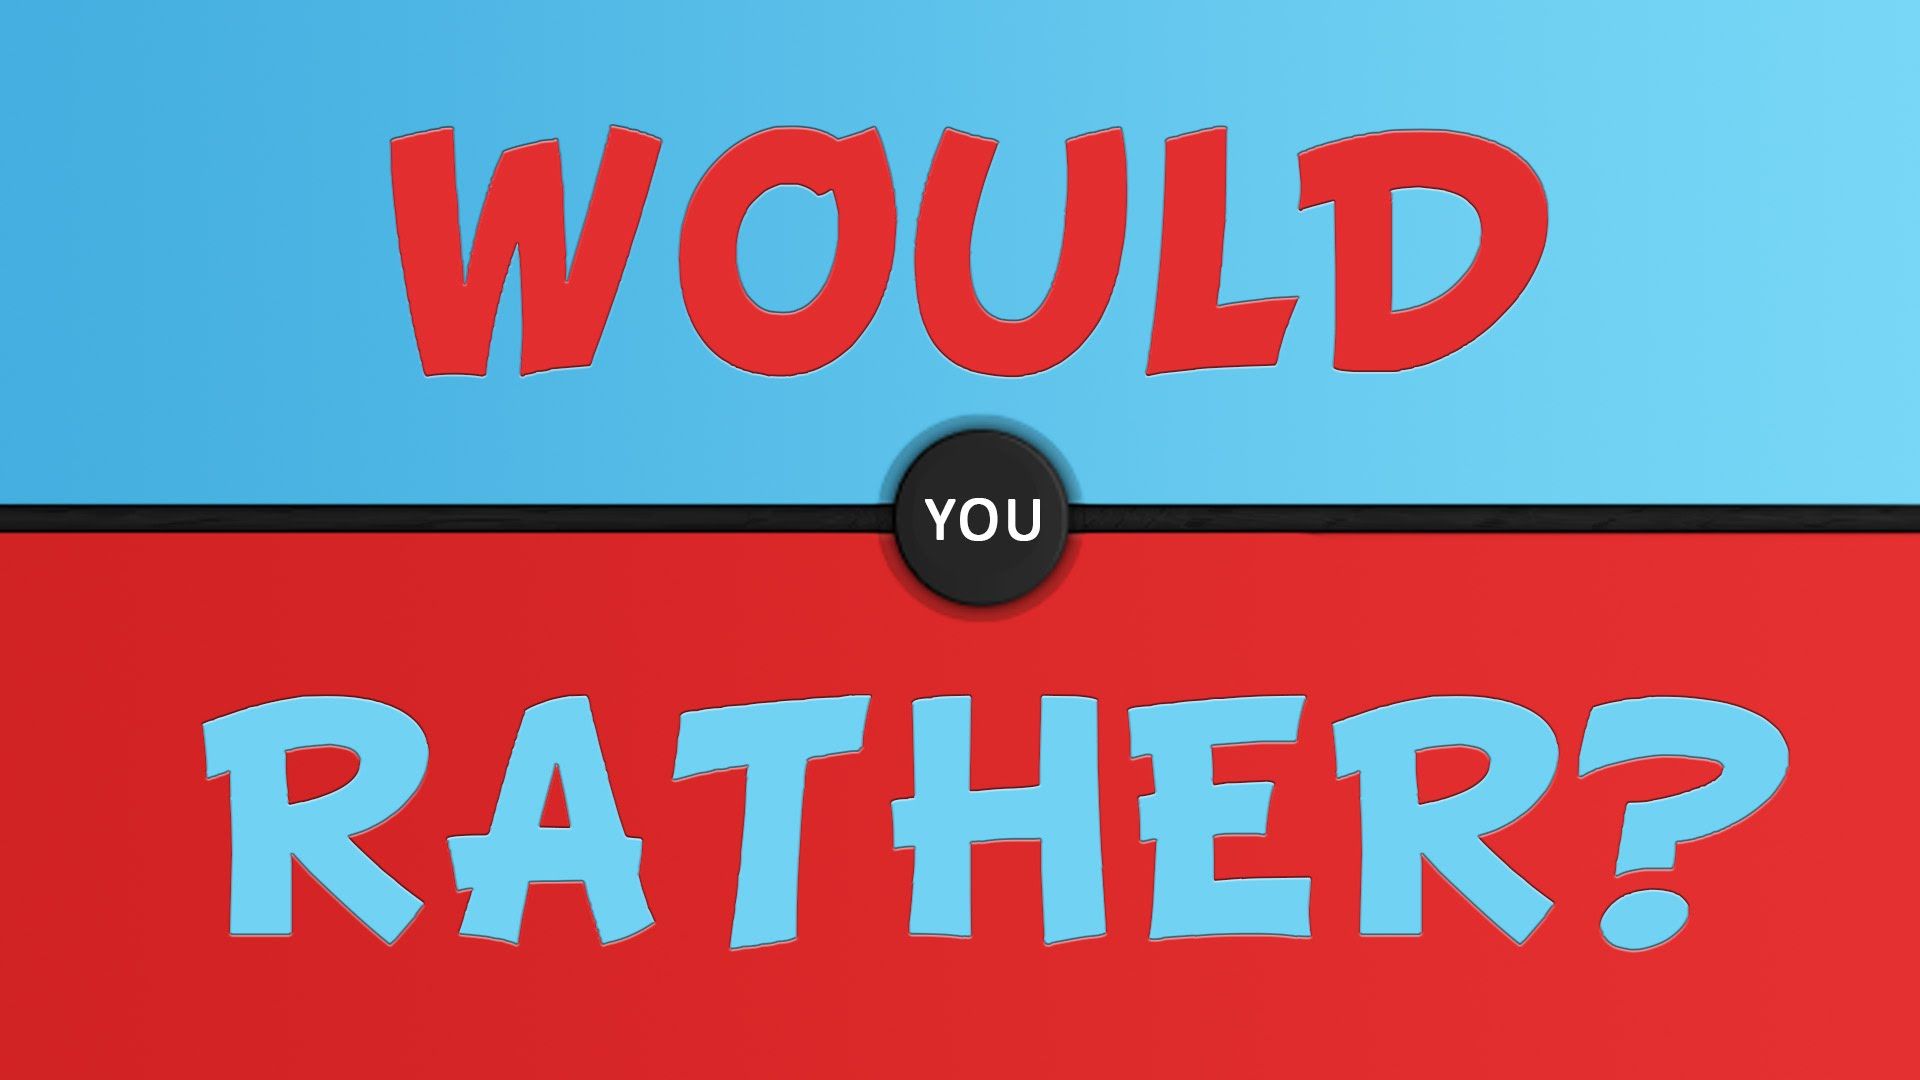 Let's Play Would You Rather. Would You Rather If Your Daughter Was A Porn Star Or A Prostitute (working 6 Days A Week 4 Hrs Per Day)?